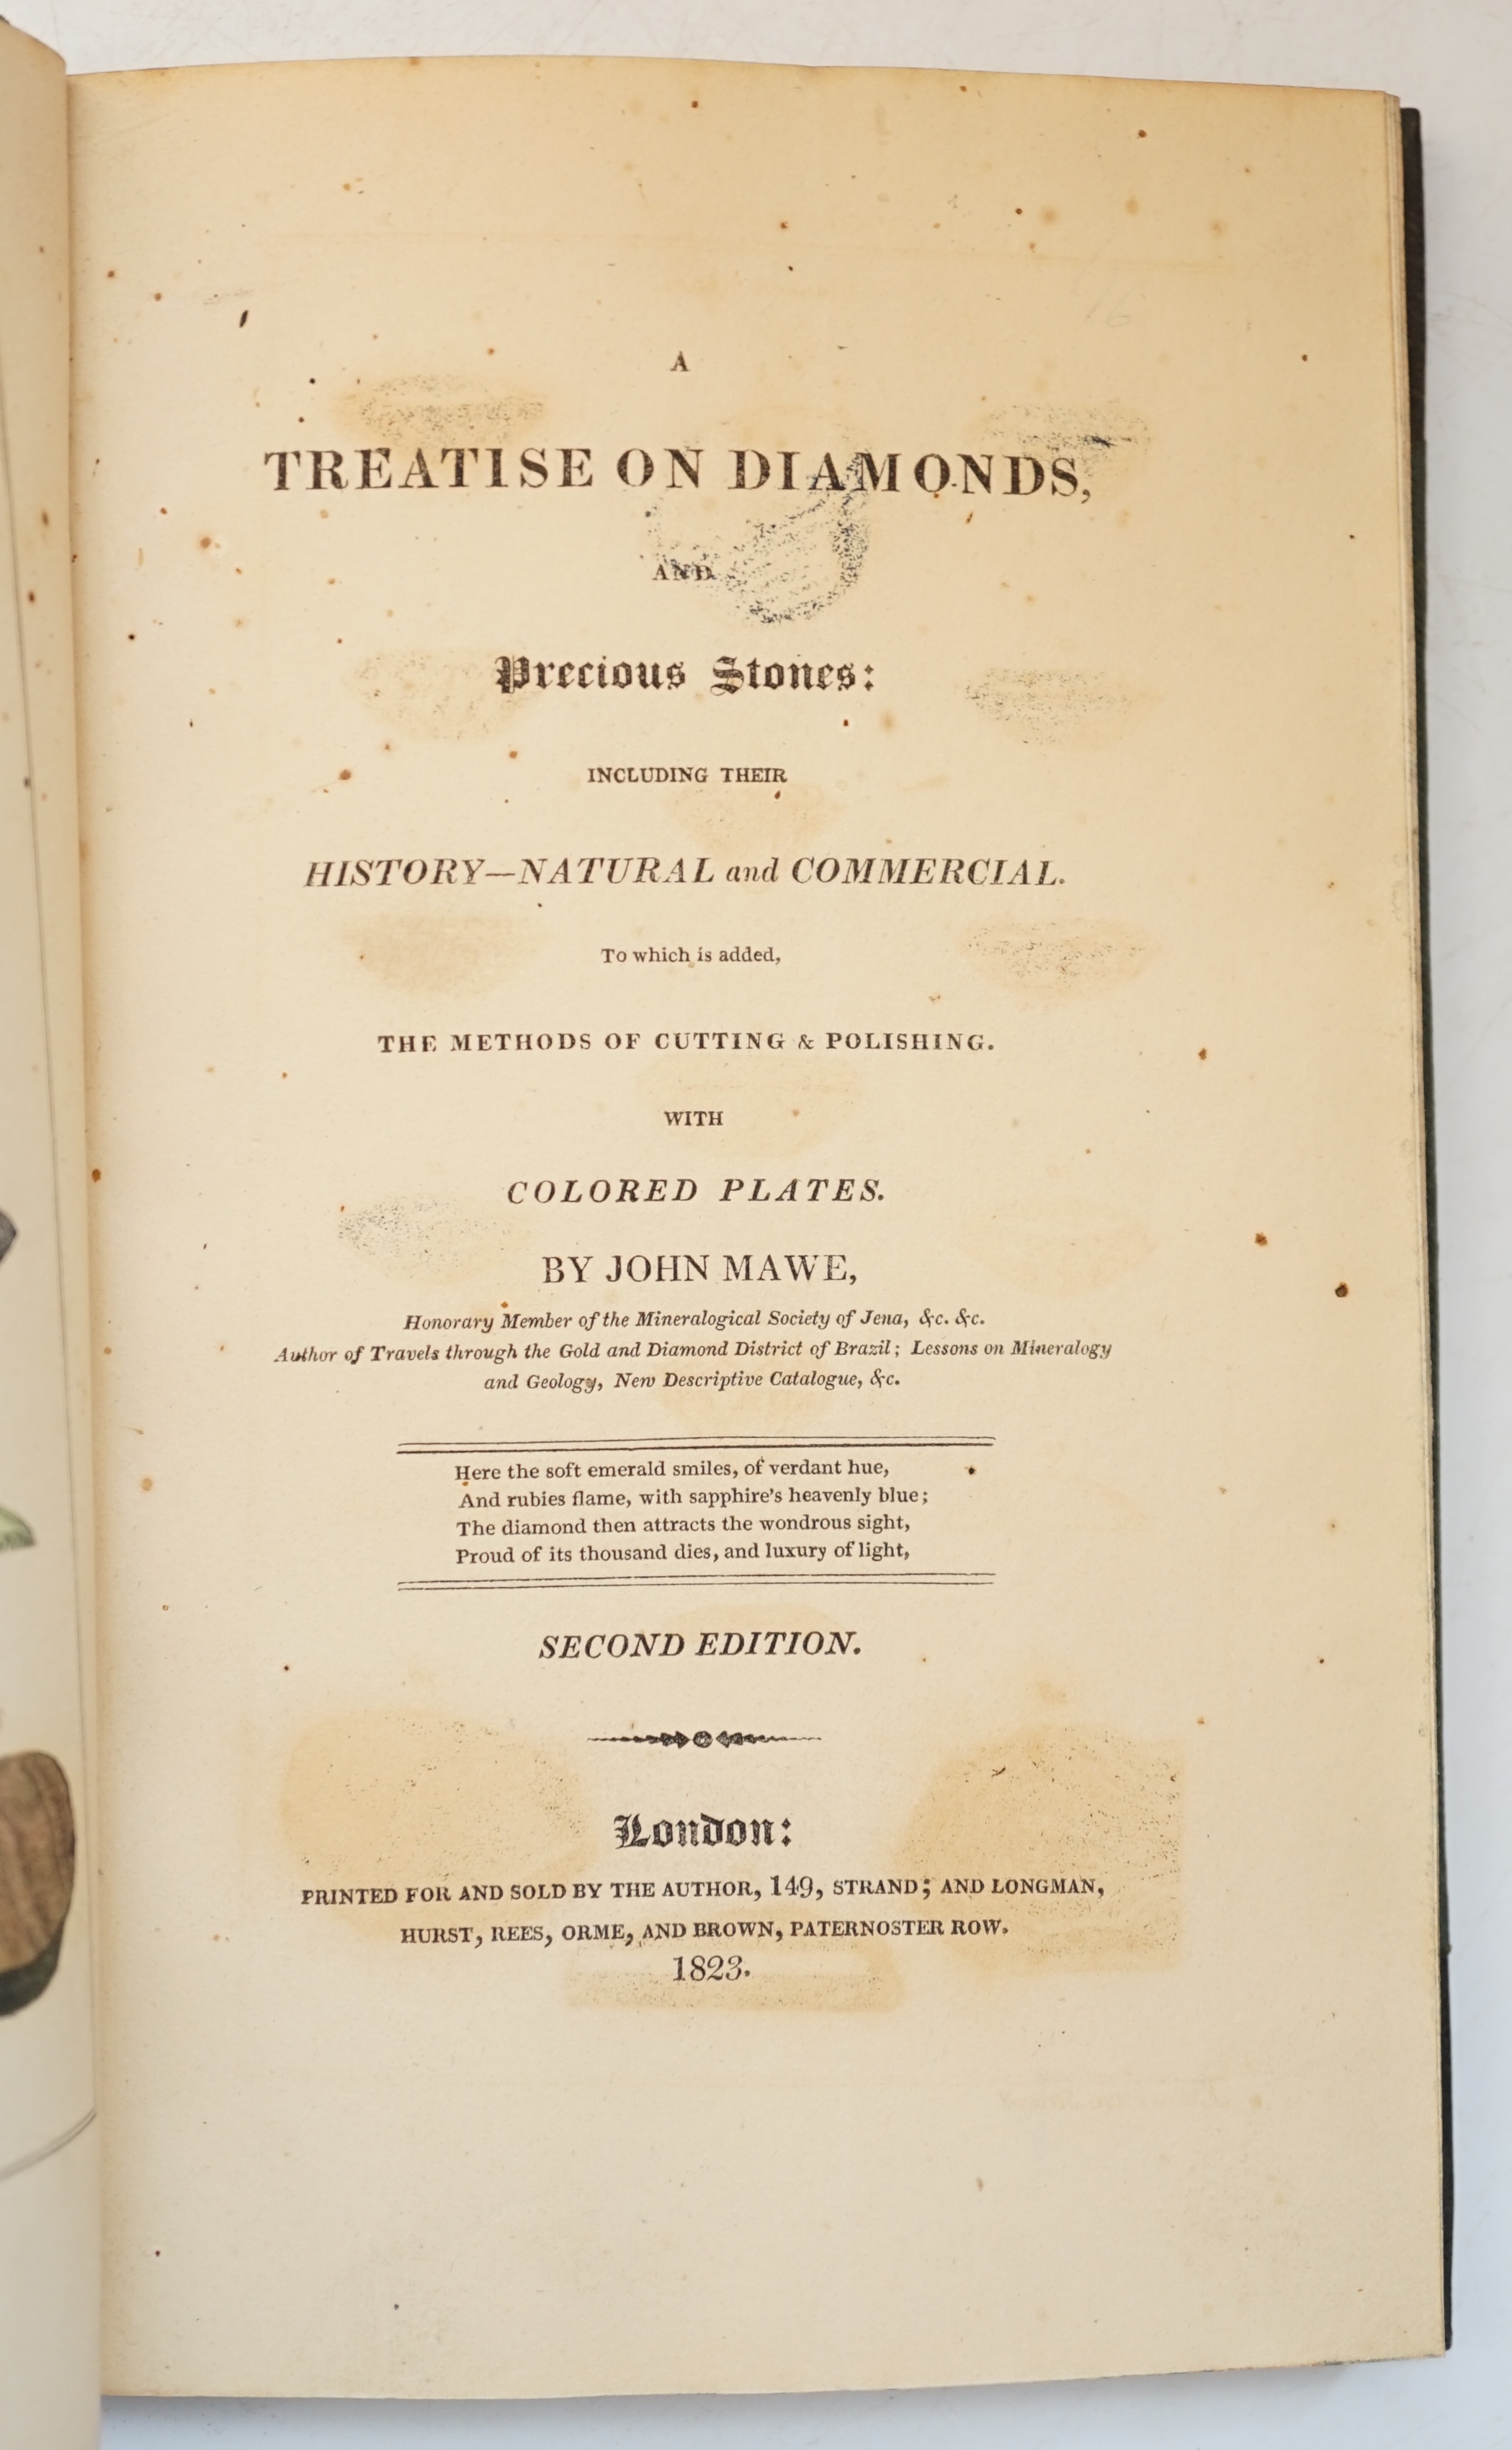 Mawe, John - A Treatise on Diamonds and Precious Stones: Including Their History, Natural and Commercial, 2nd edition, 5 engraved plates (3 hand-coloured), contemporary half calf, 8vo, for the Author, 1823